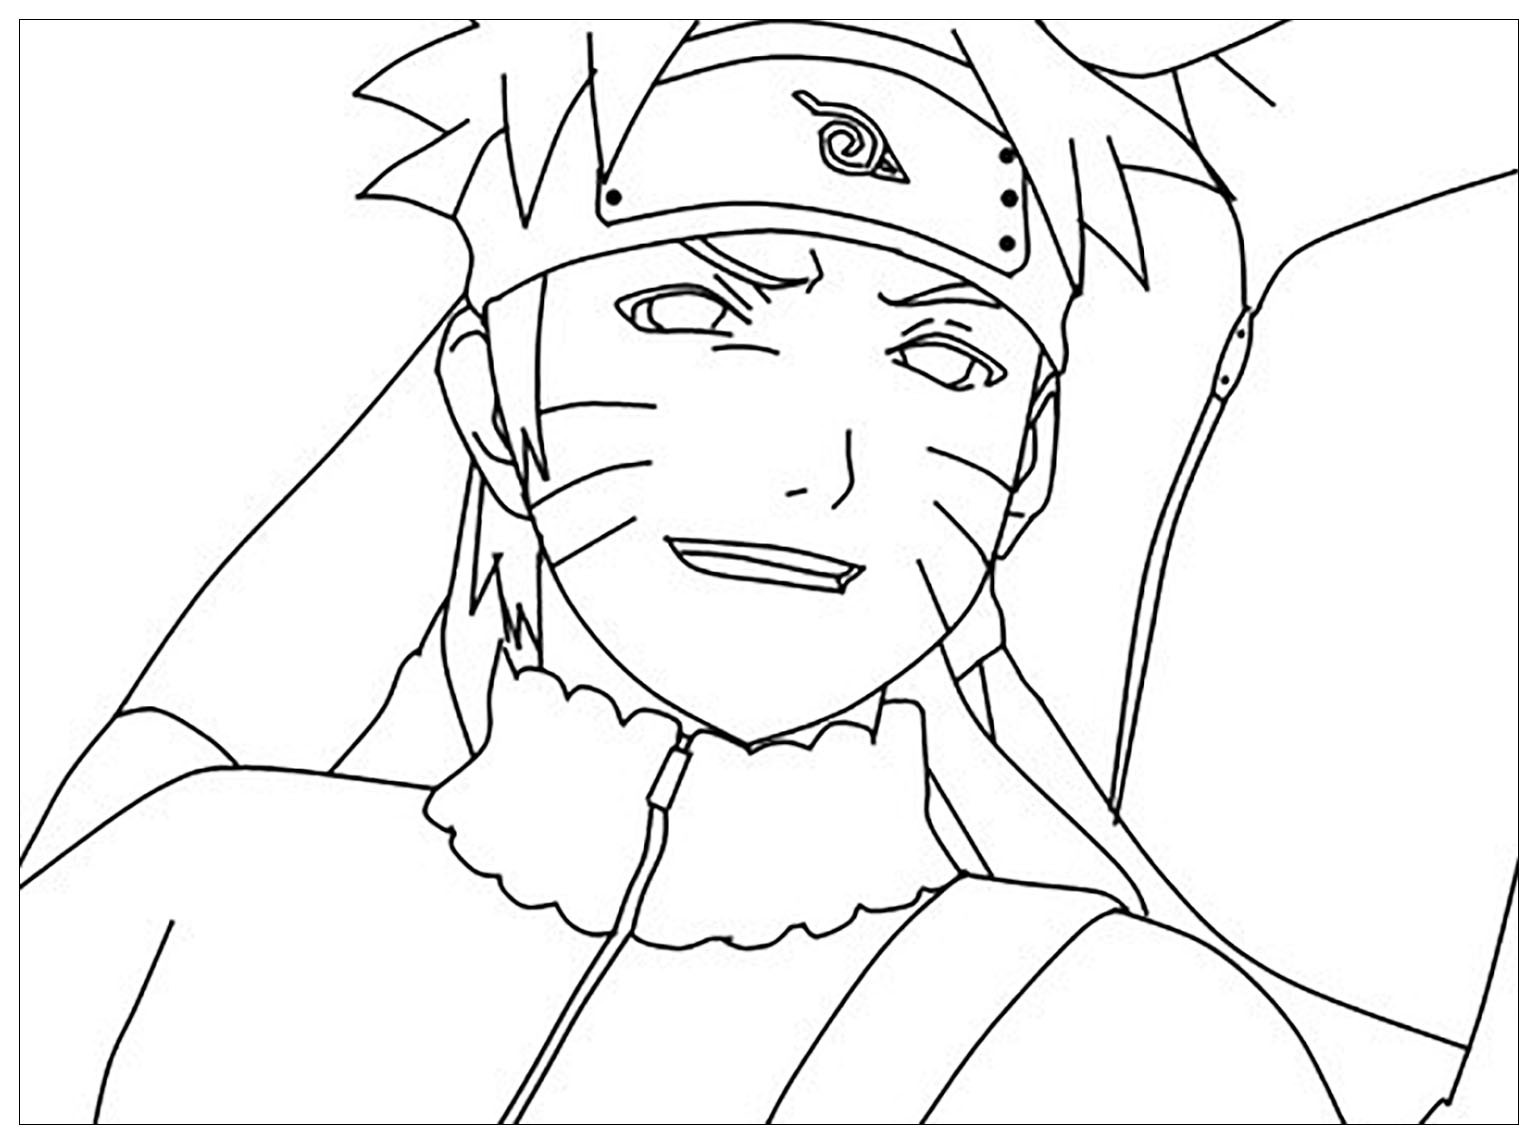 Naruto to color for kids - Naruto Kids Coloring Pages